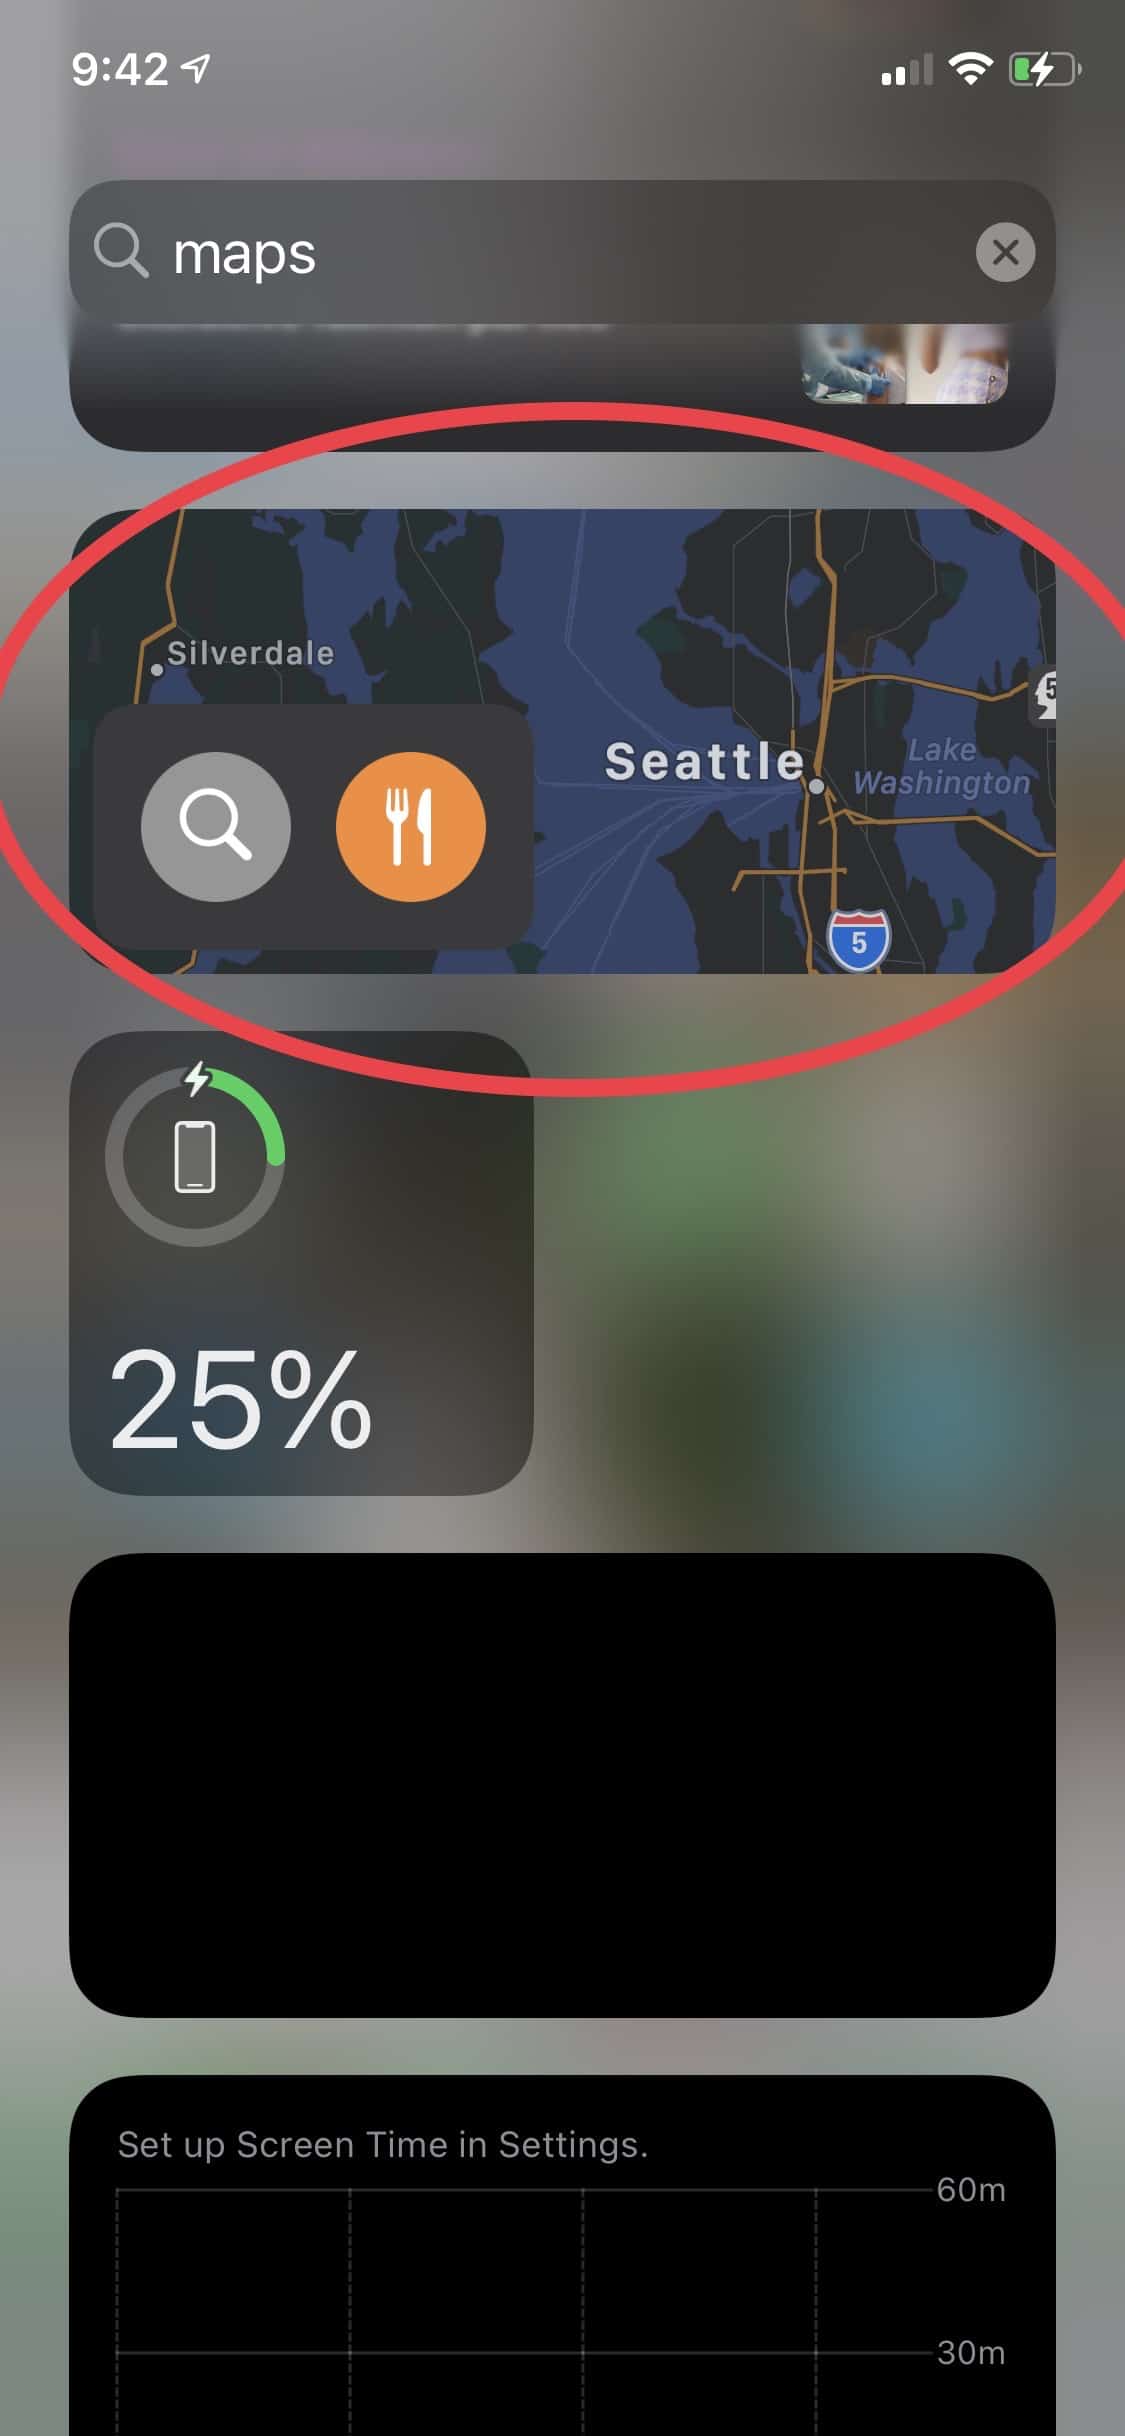 Swipe right on your home screen to open Apple Maps